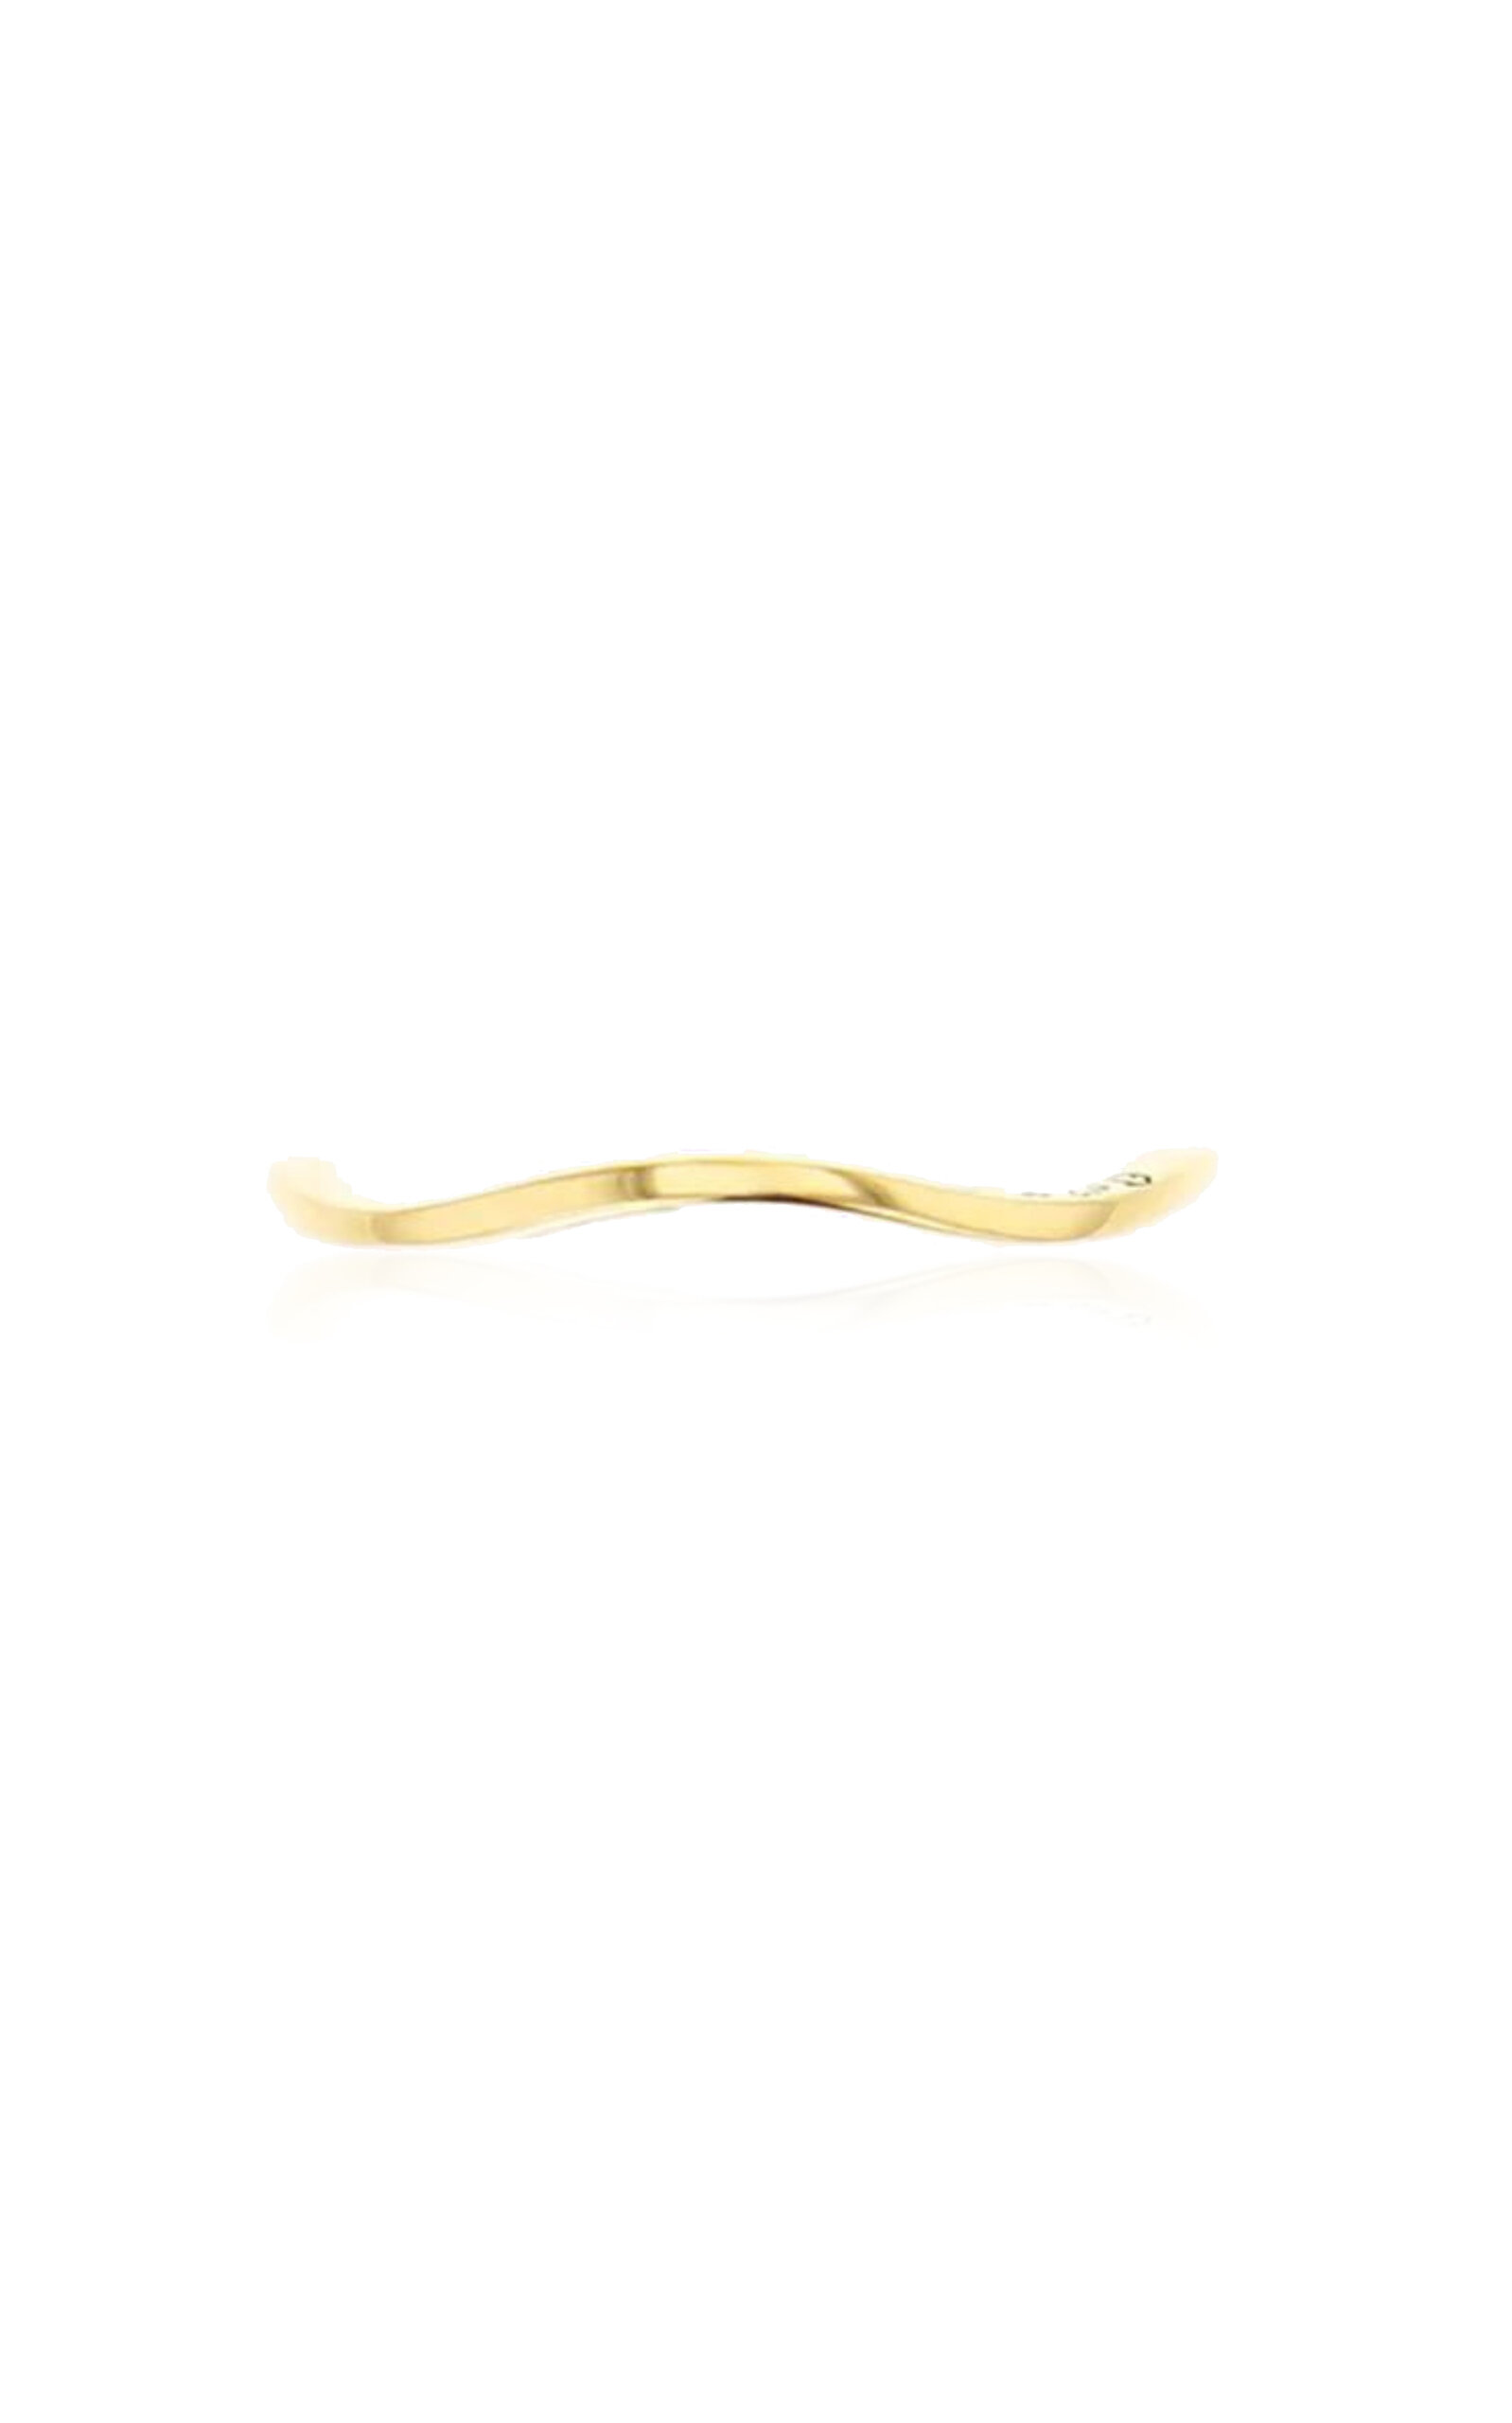 Elie Top Women's Stylet 18K Yellow Gold Ring